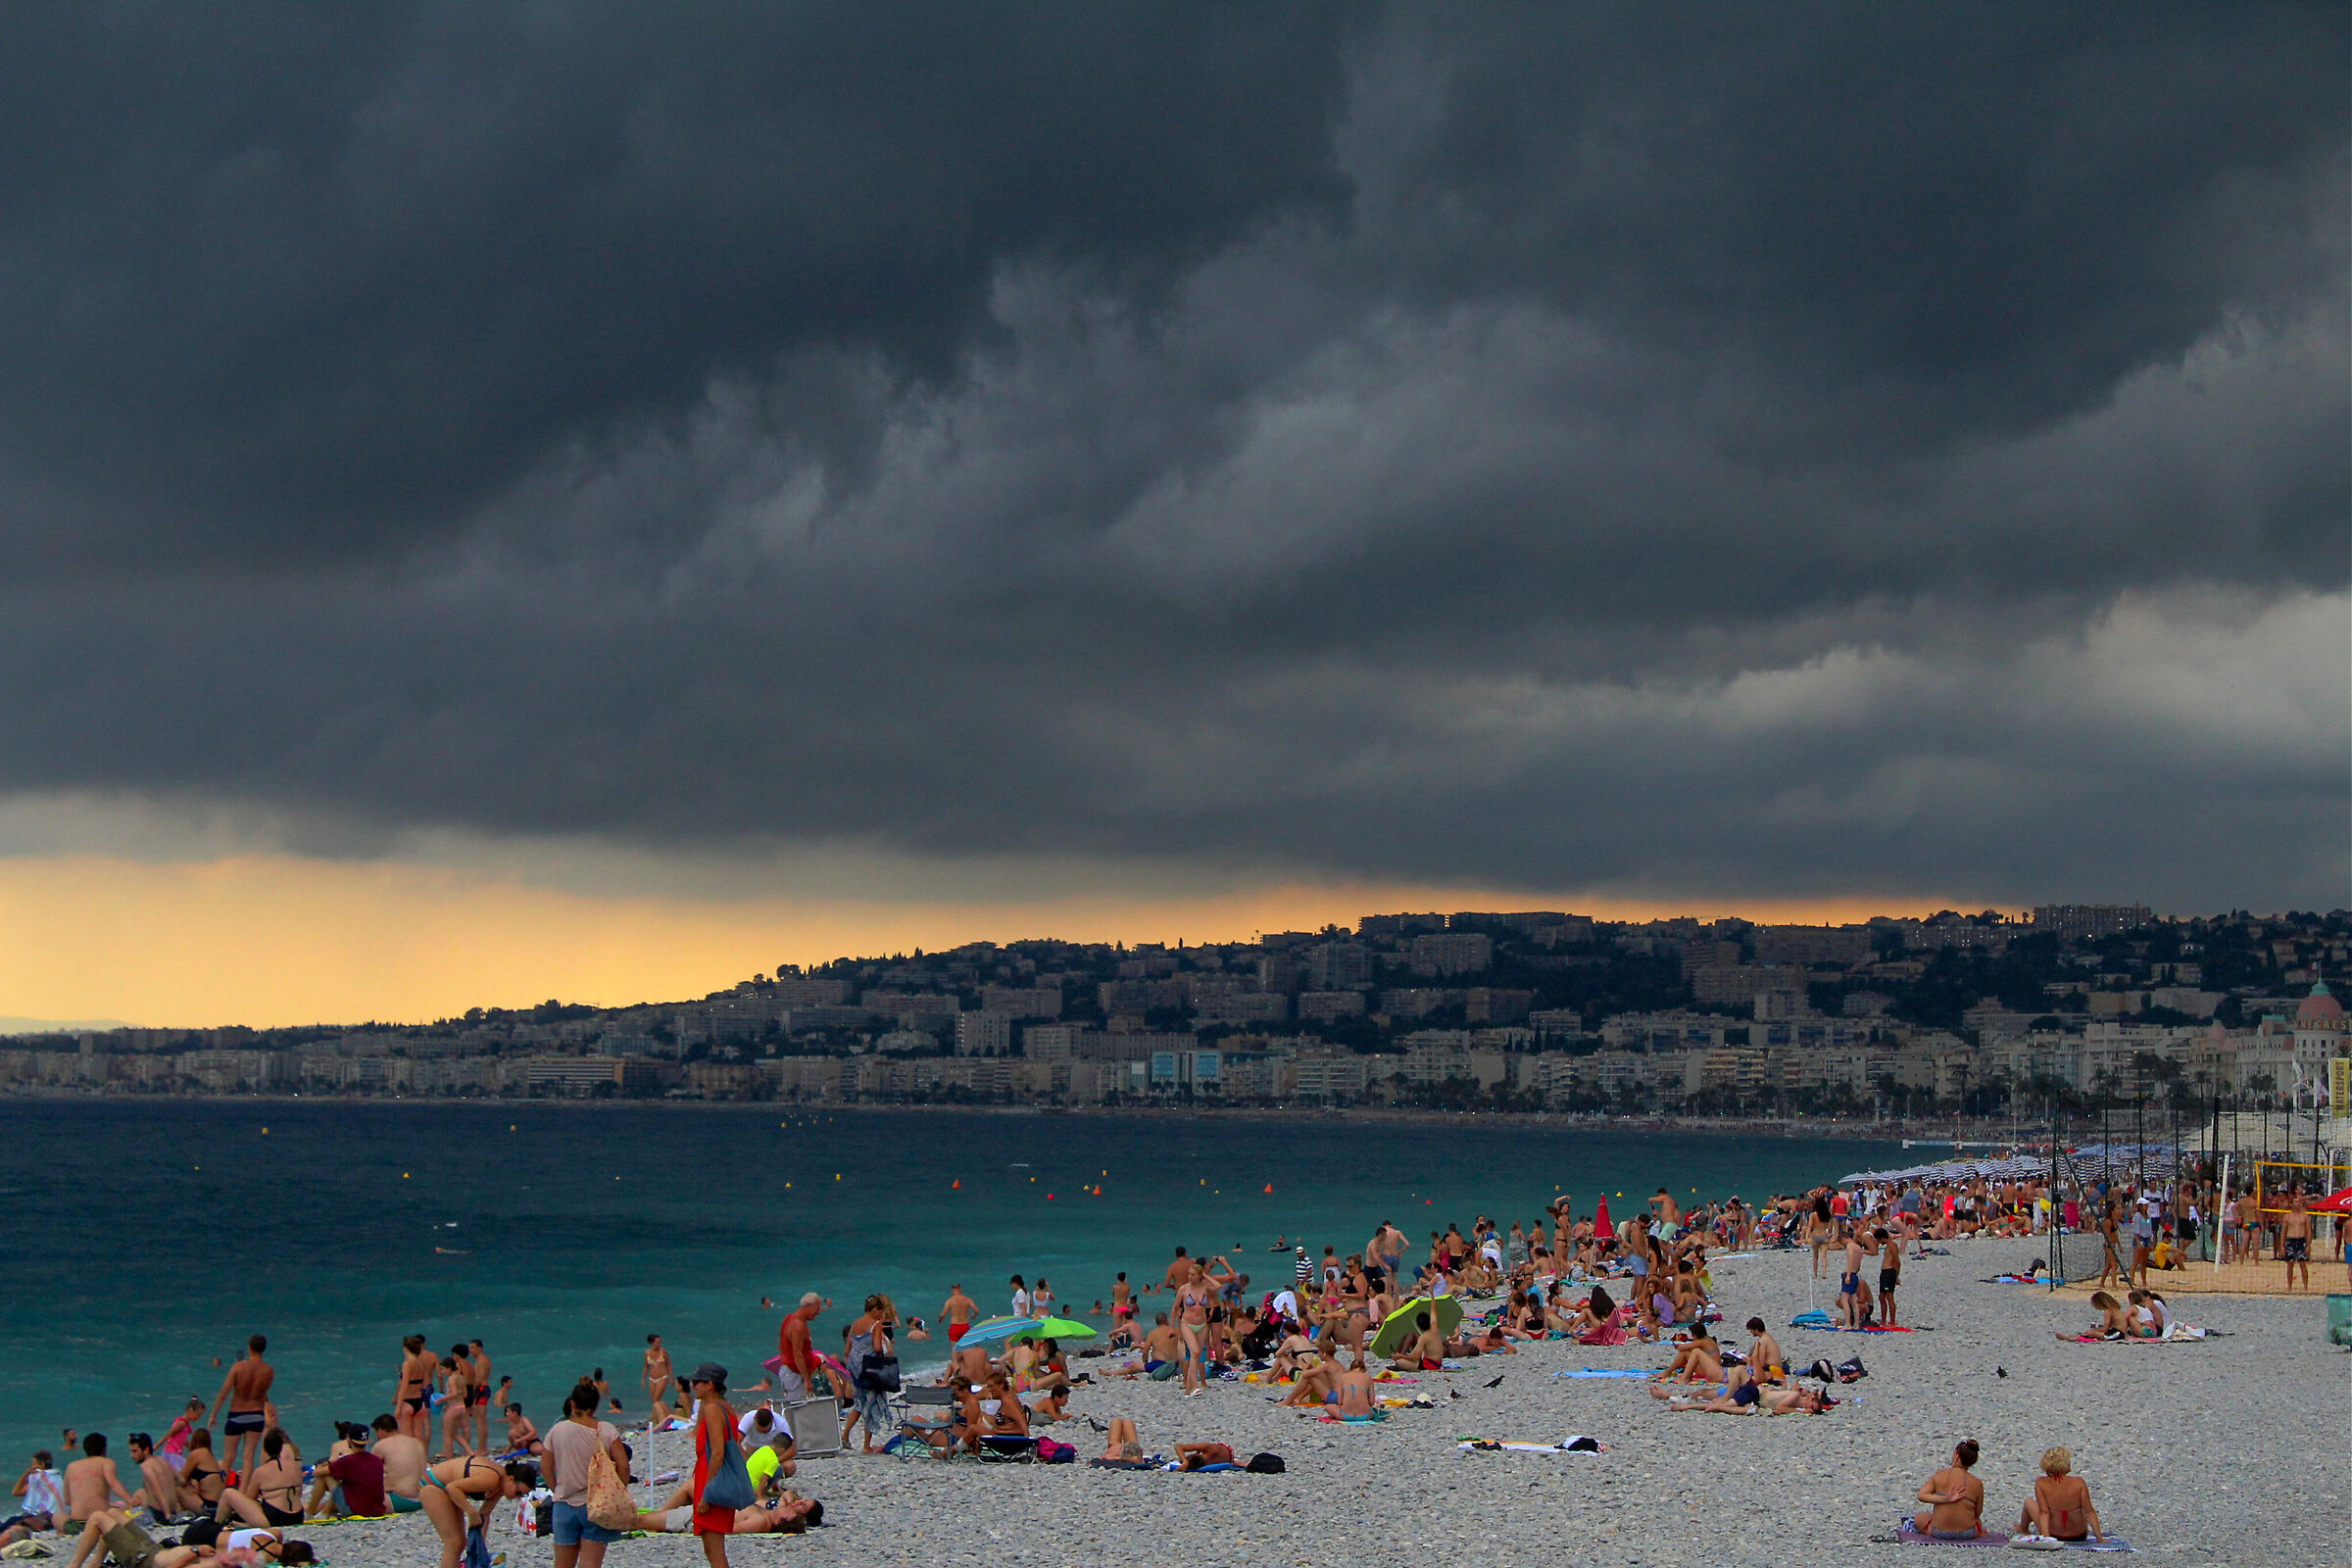 Summer afternoon in Nice...